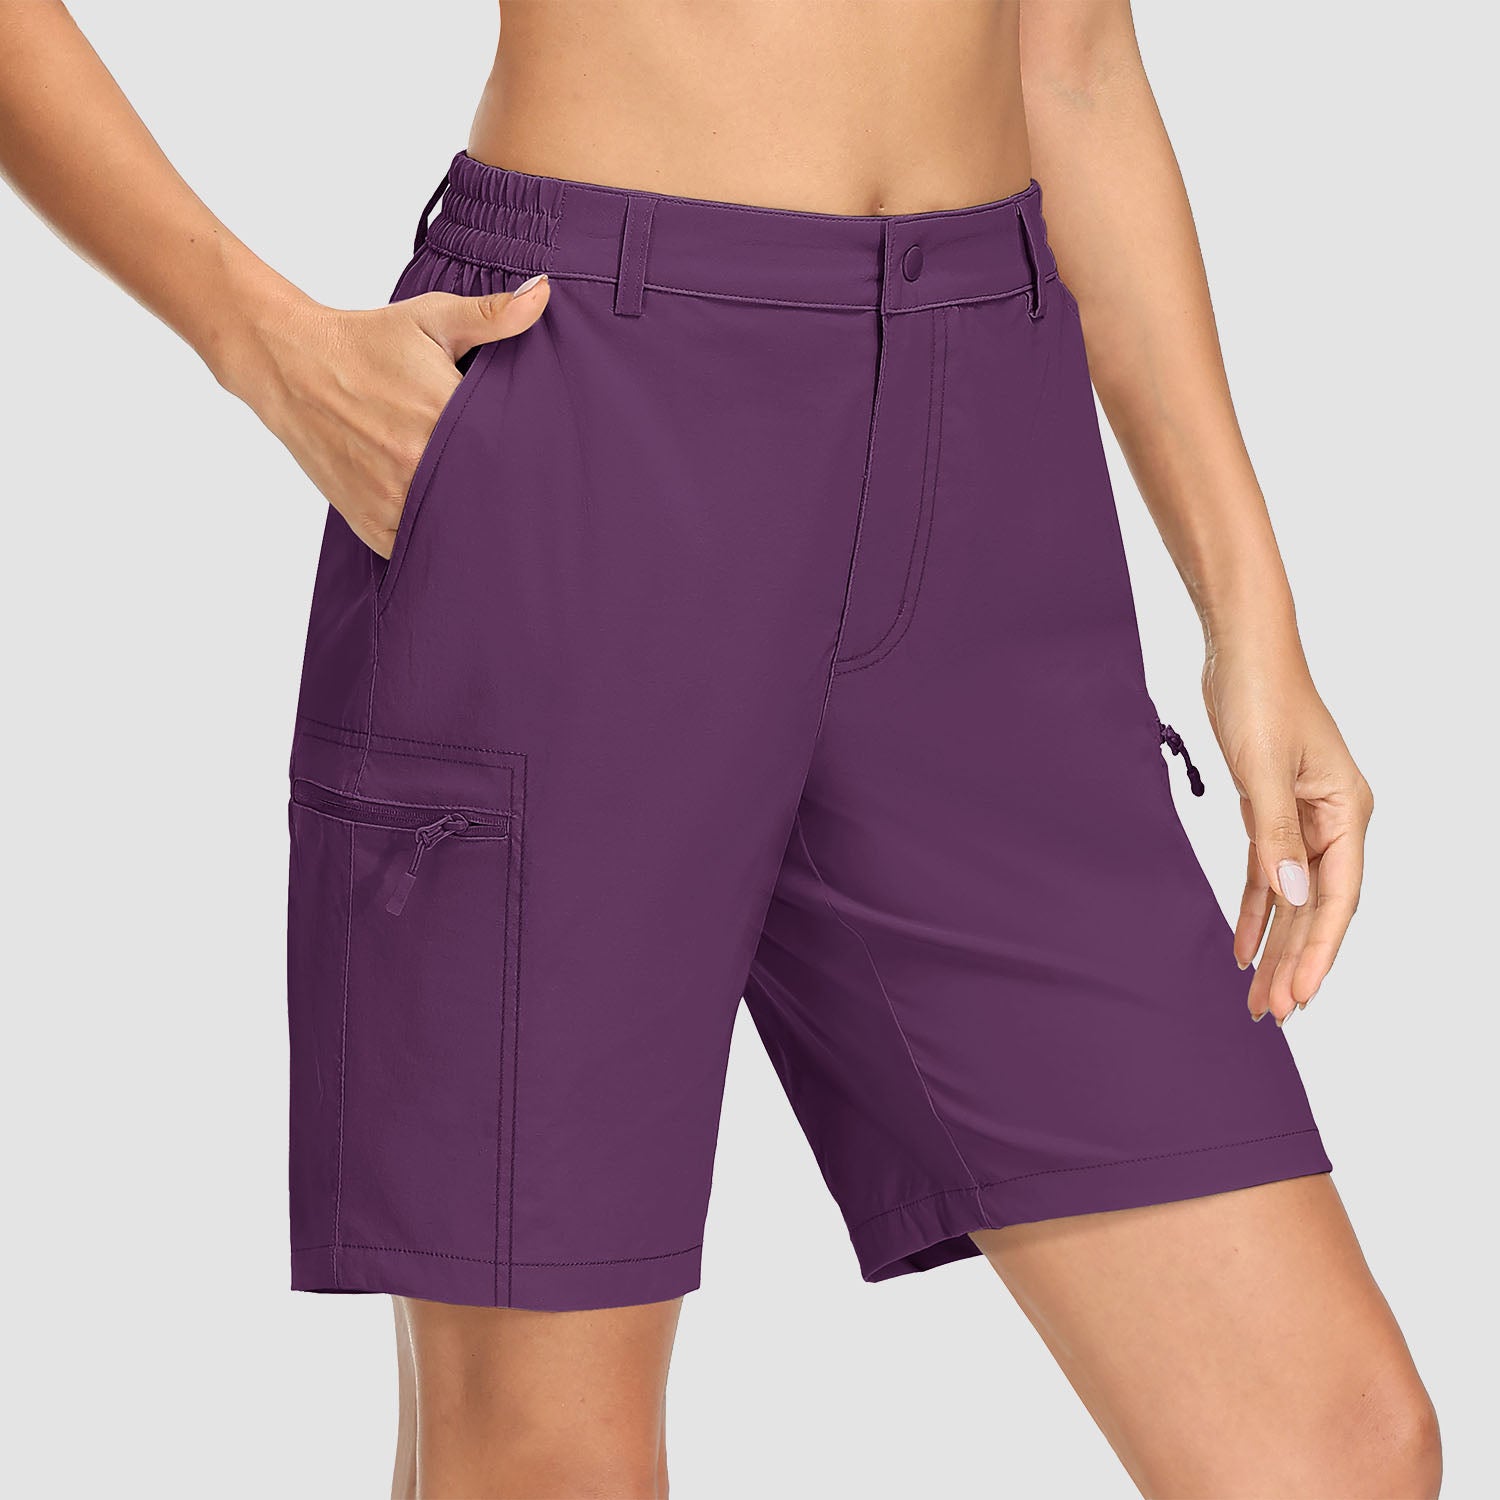 Women's Hiking Shorts with 5 Pockets Water-Resistant Ripstop Cargo Shorts Quick Dry